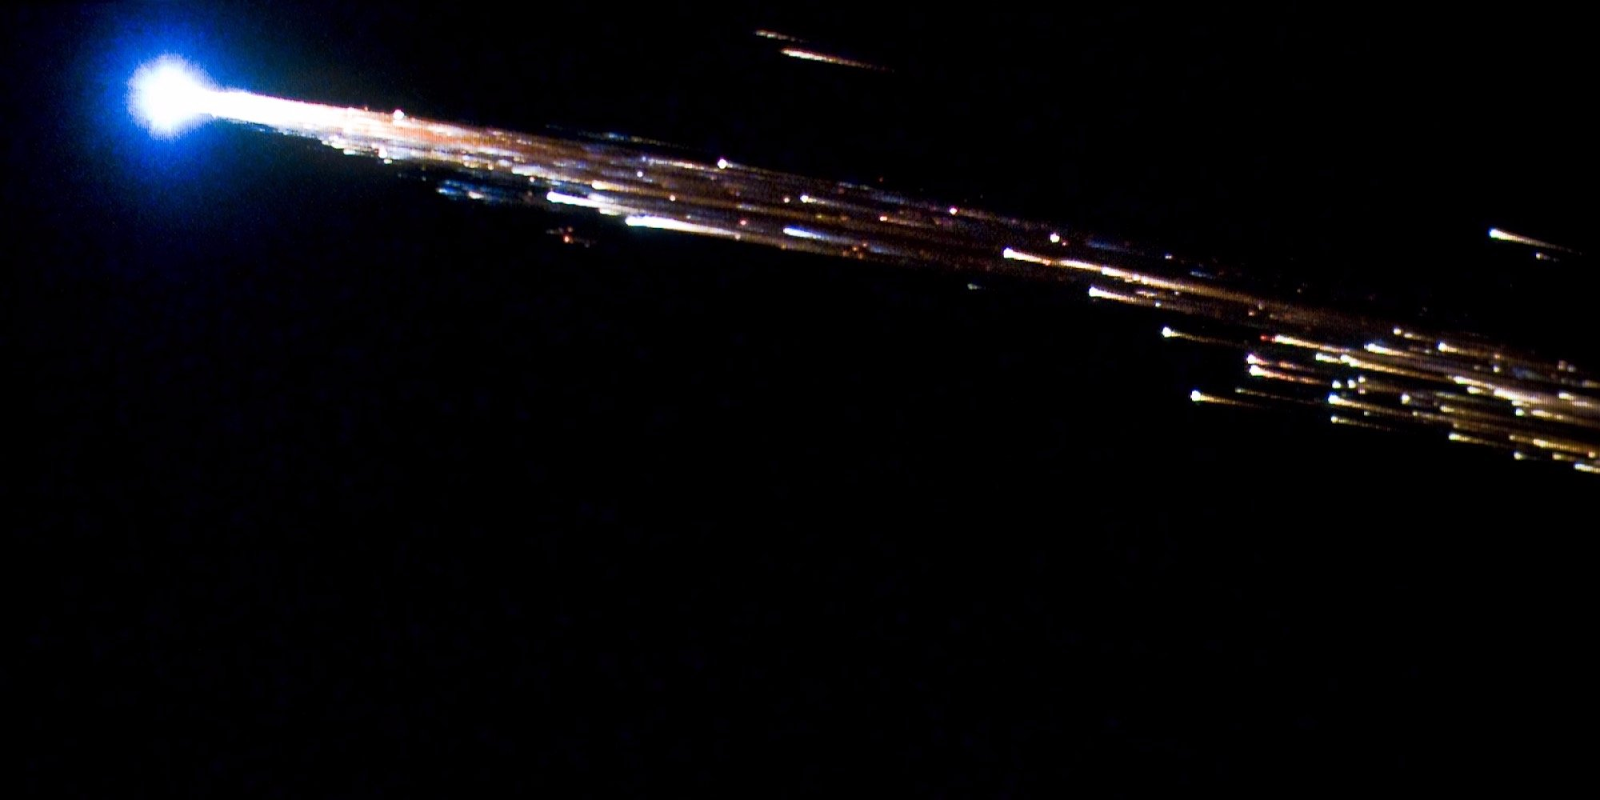 ESA's Jules Verne ATV breaks apart into a fireball while reentering Earth's atmosphere on September 29, 2008.NASA/ESA/Bill Moede and Jesse Carpenter